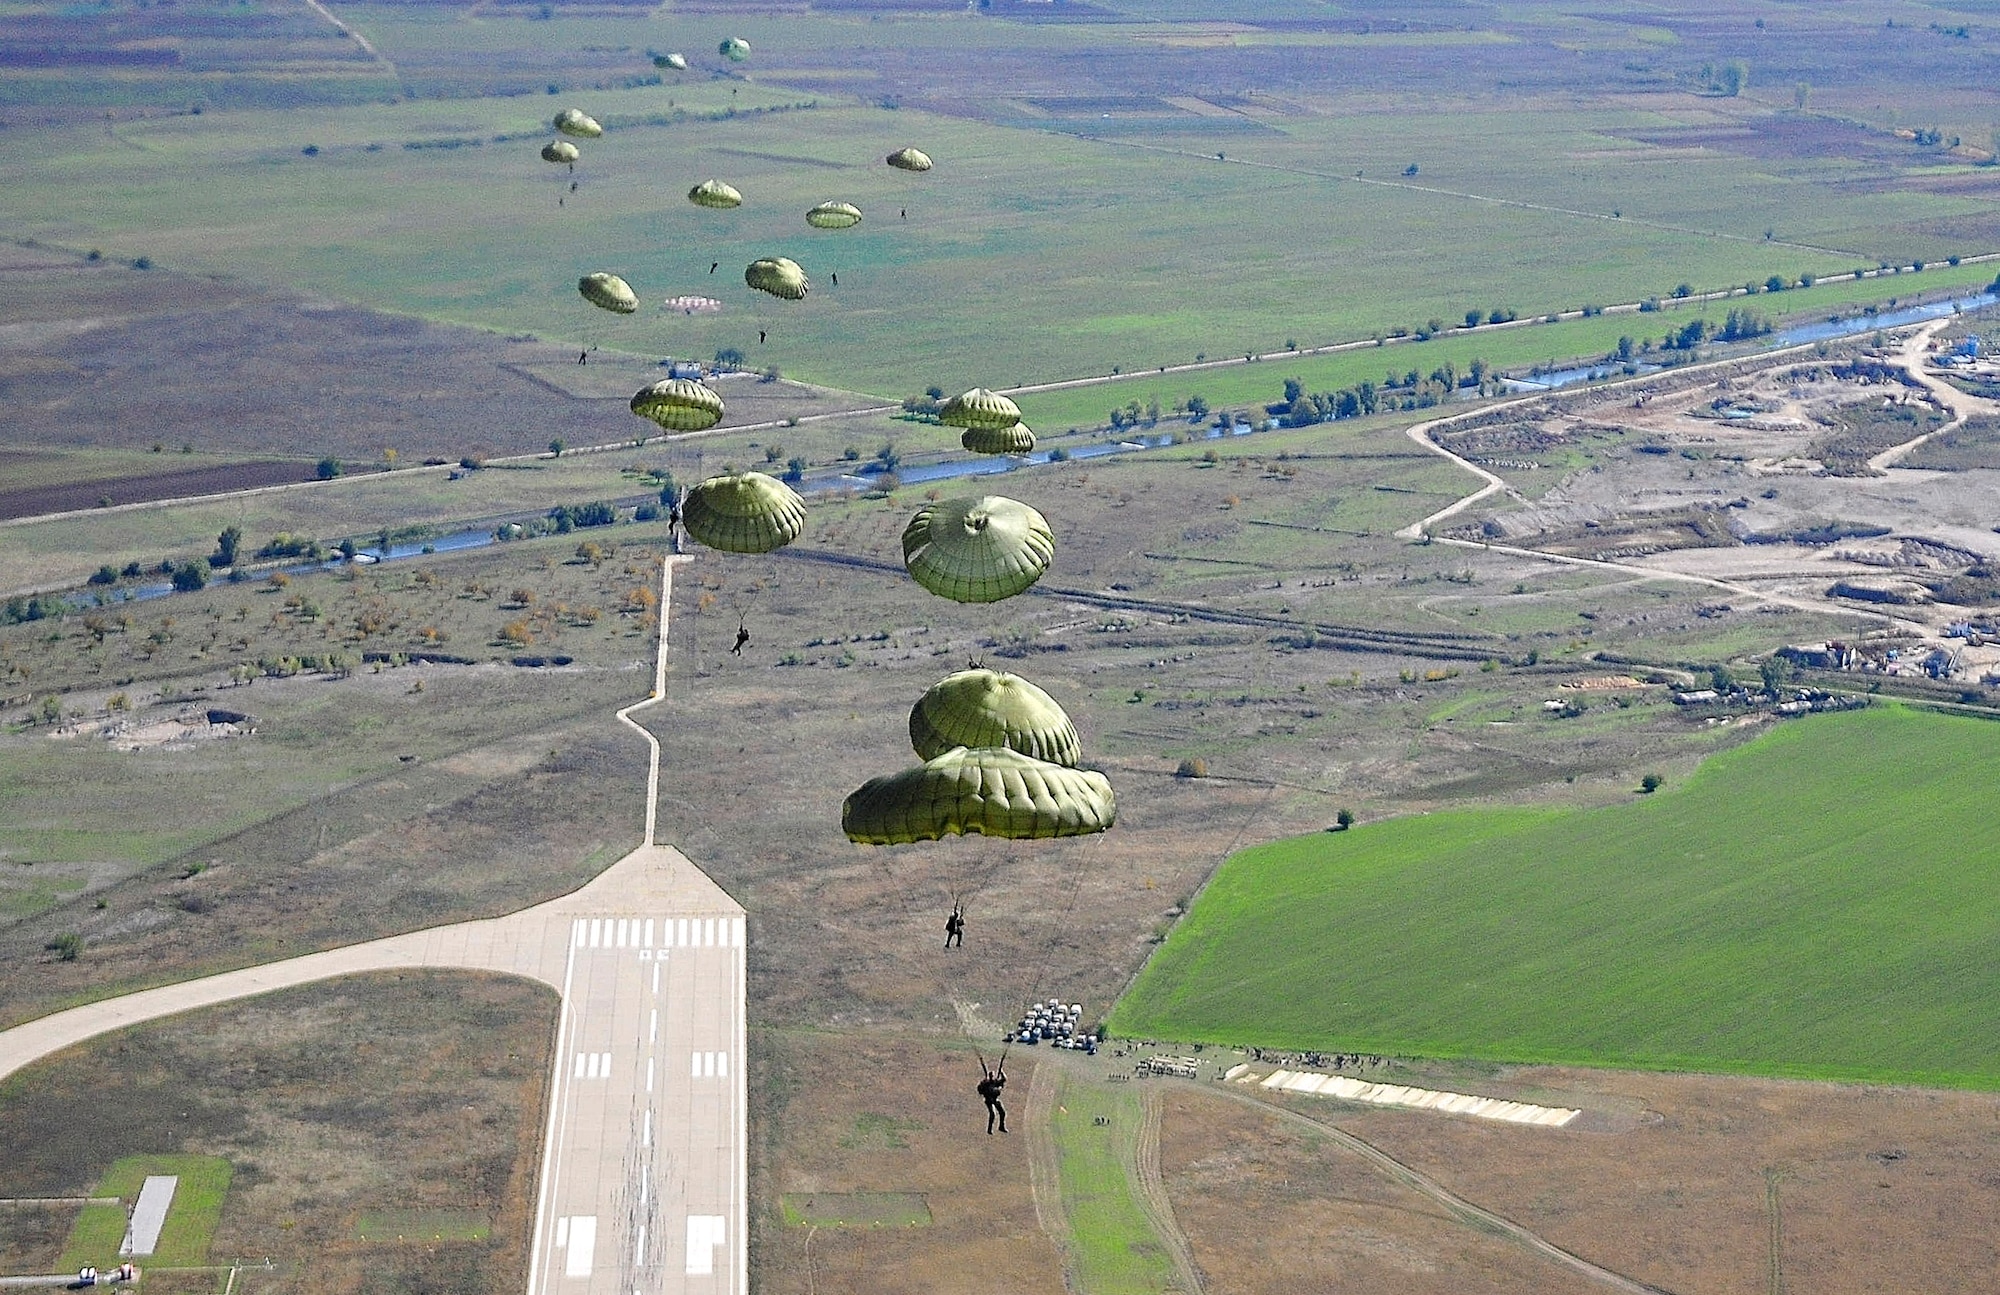 U.S. and Bulgarian Air Force paratroopers take to the sky over Plovdiv, Bulgaria, after jumping from a C-130J Super Hercules, Oct 22 during Thracian Fall 2010. The Hercules and U.S. Airmen are deployed from the 86th Airlift Wing and 435th Air Ground Operations Wing at Ramstein Air Base, Germany. (U.S. Air Force photo by Tech. Sgt. Michael Voss)